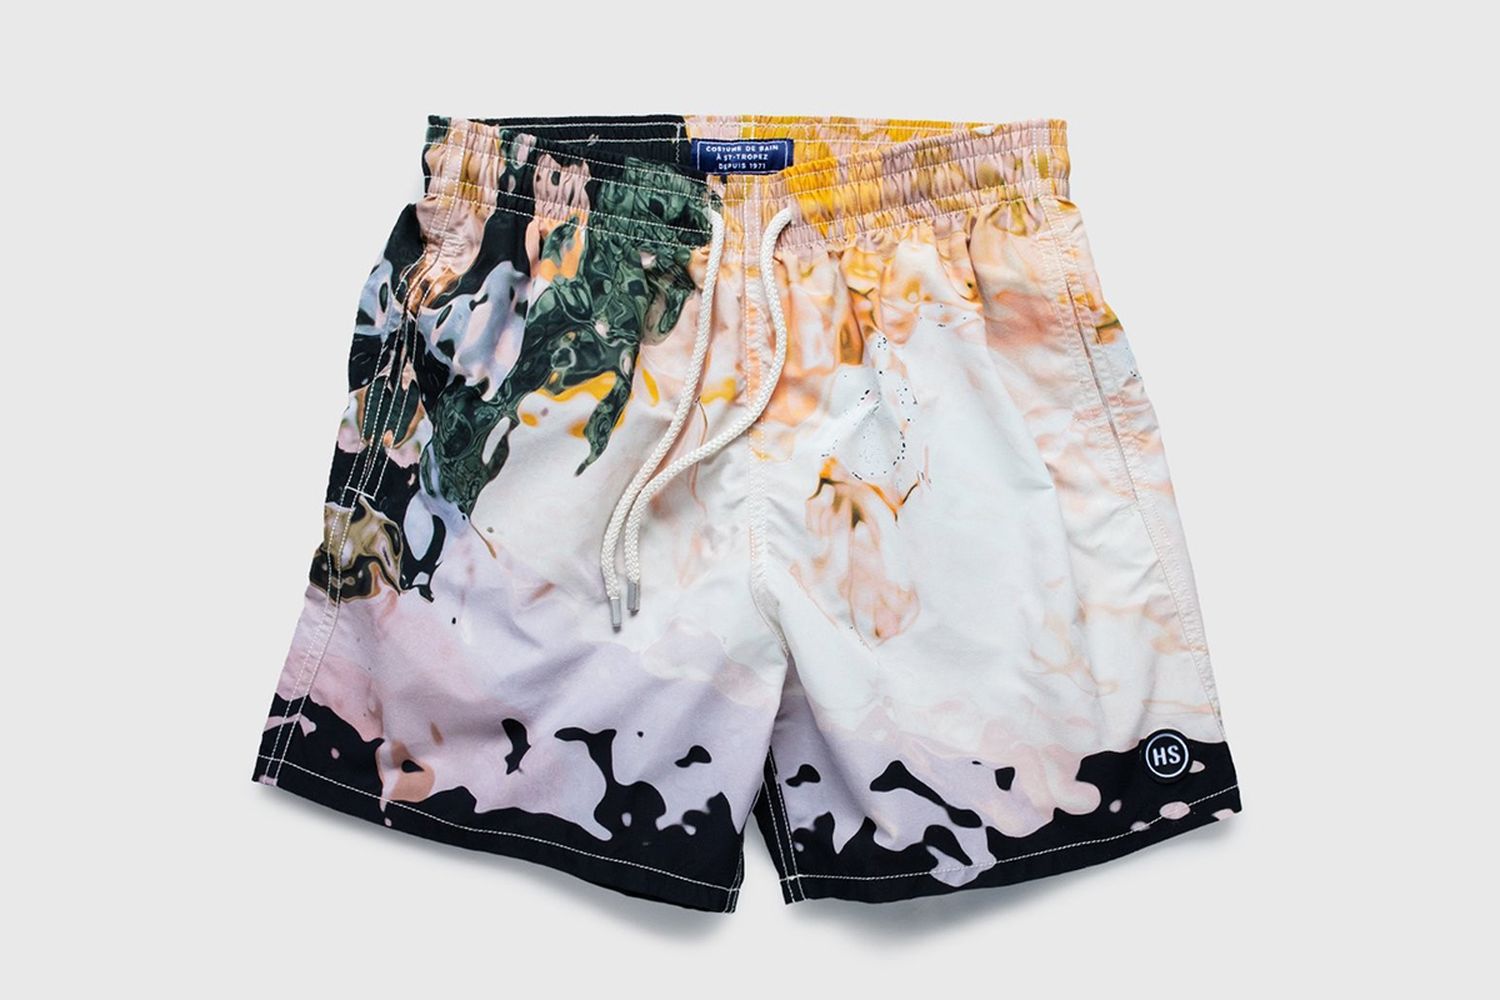 Wexzss Black and White Camouflage Funny Summer Quick-Drying Swim Trunks Beach Shorts Cargo Shorts